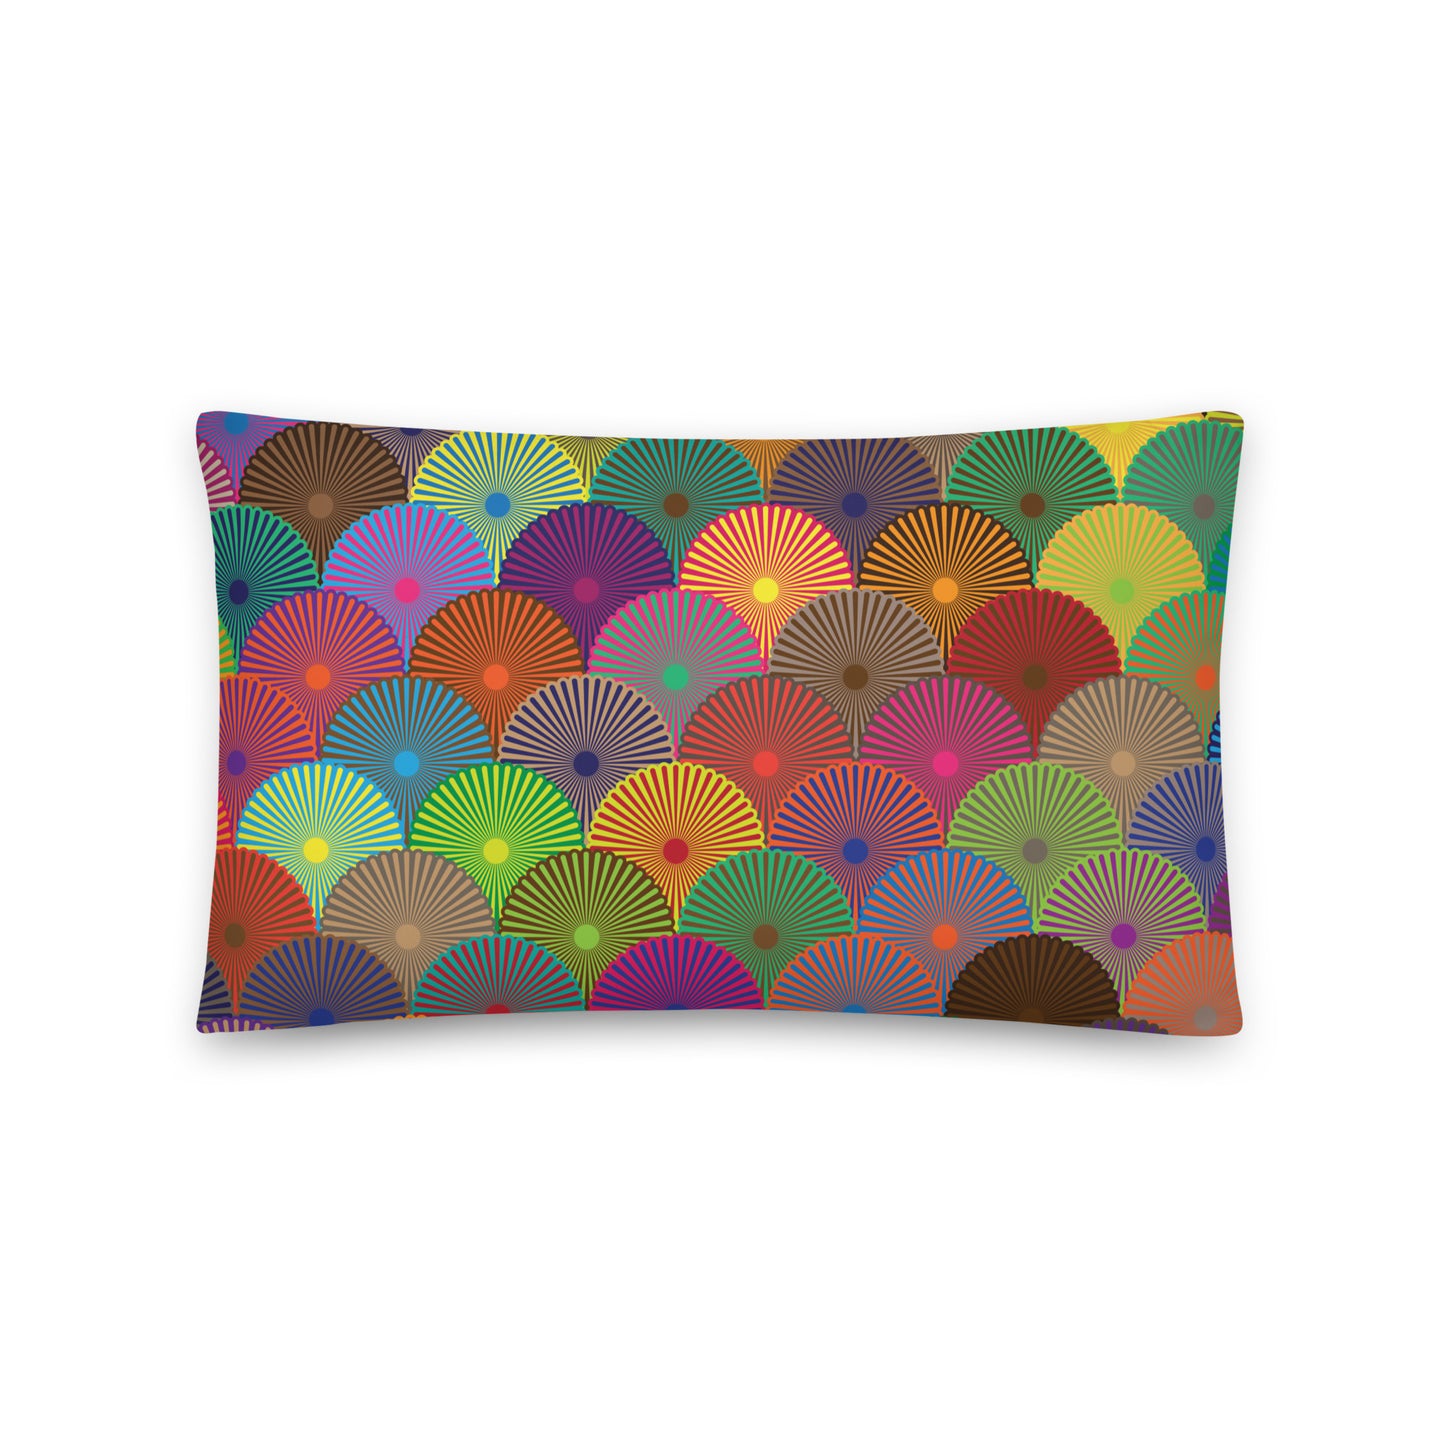 Colorful Flower Circles - Sustainably Made Pillows